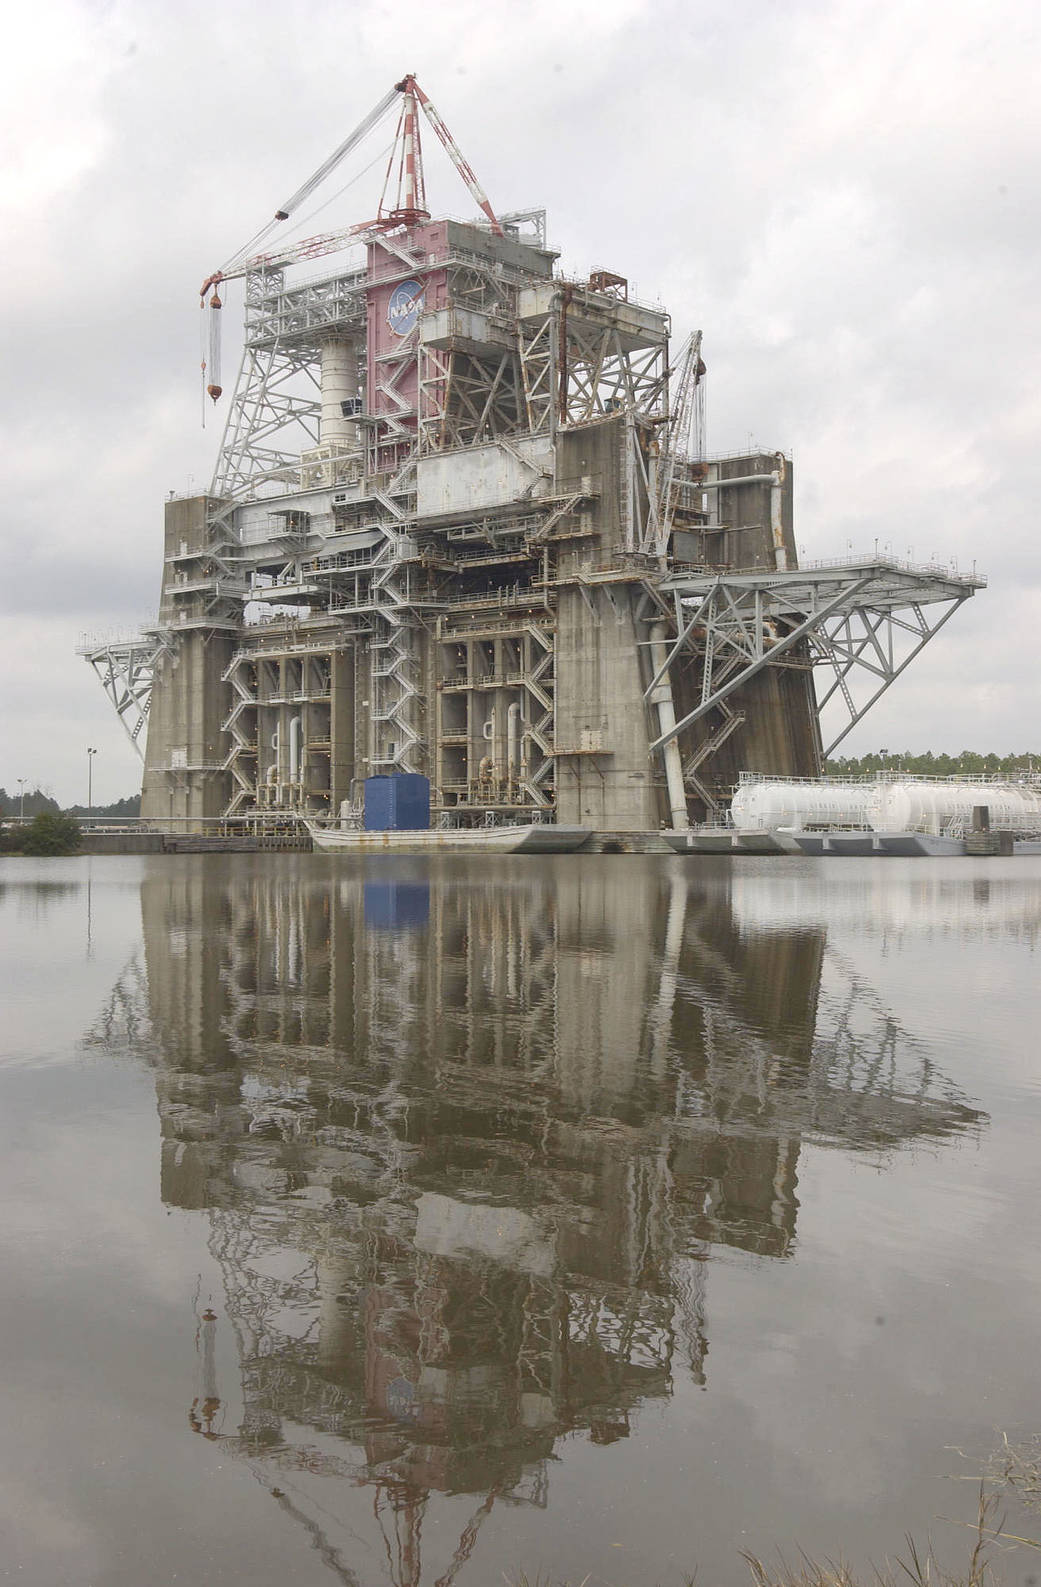 The B-1/B-2 Test Stand is a dual-position, vertical, static-firing structure built at Stennis Space Center in the 1960s.